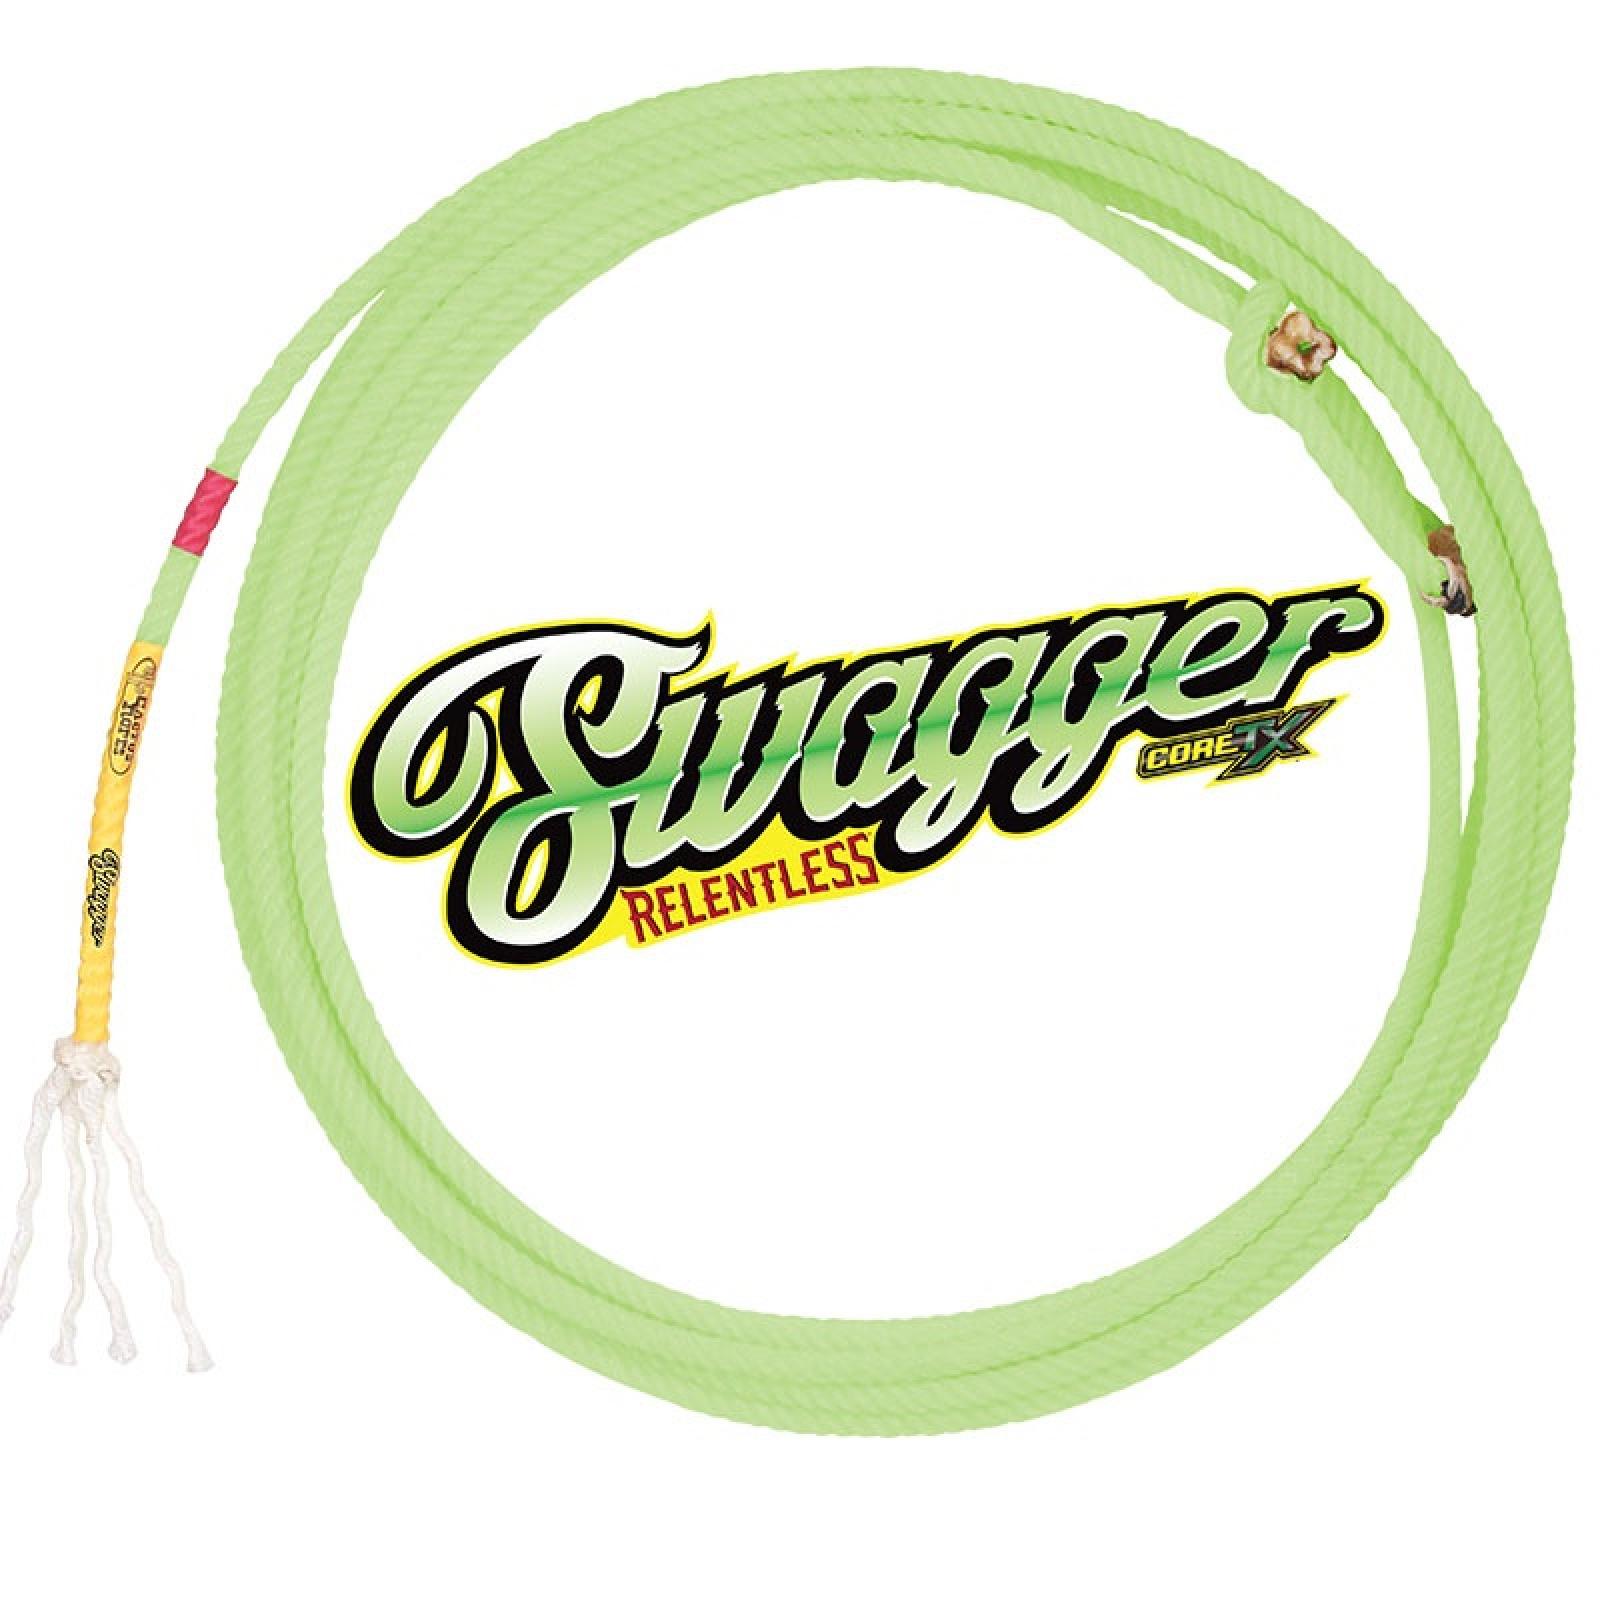 Cactus Ropes Swagger CoreTX 32' Head Rope